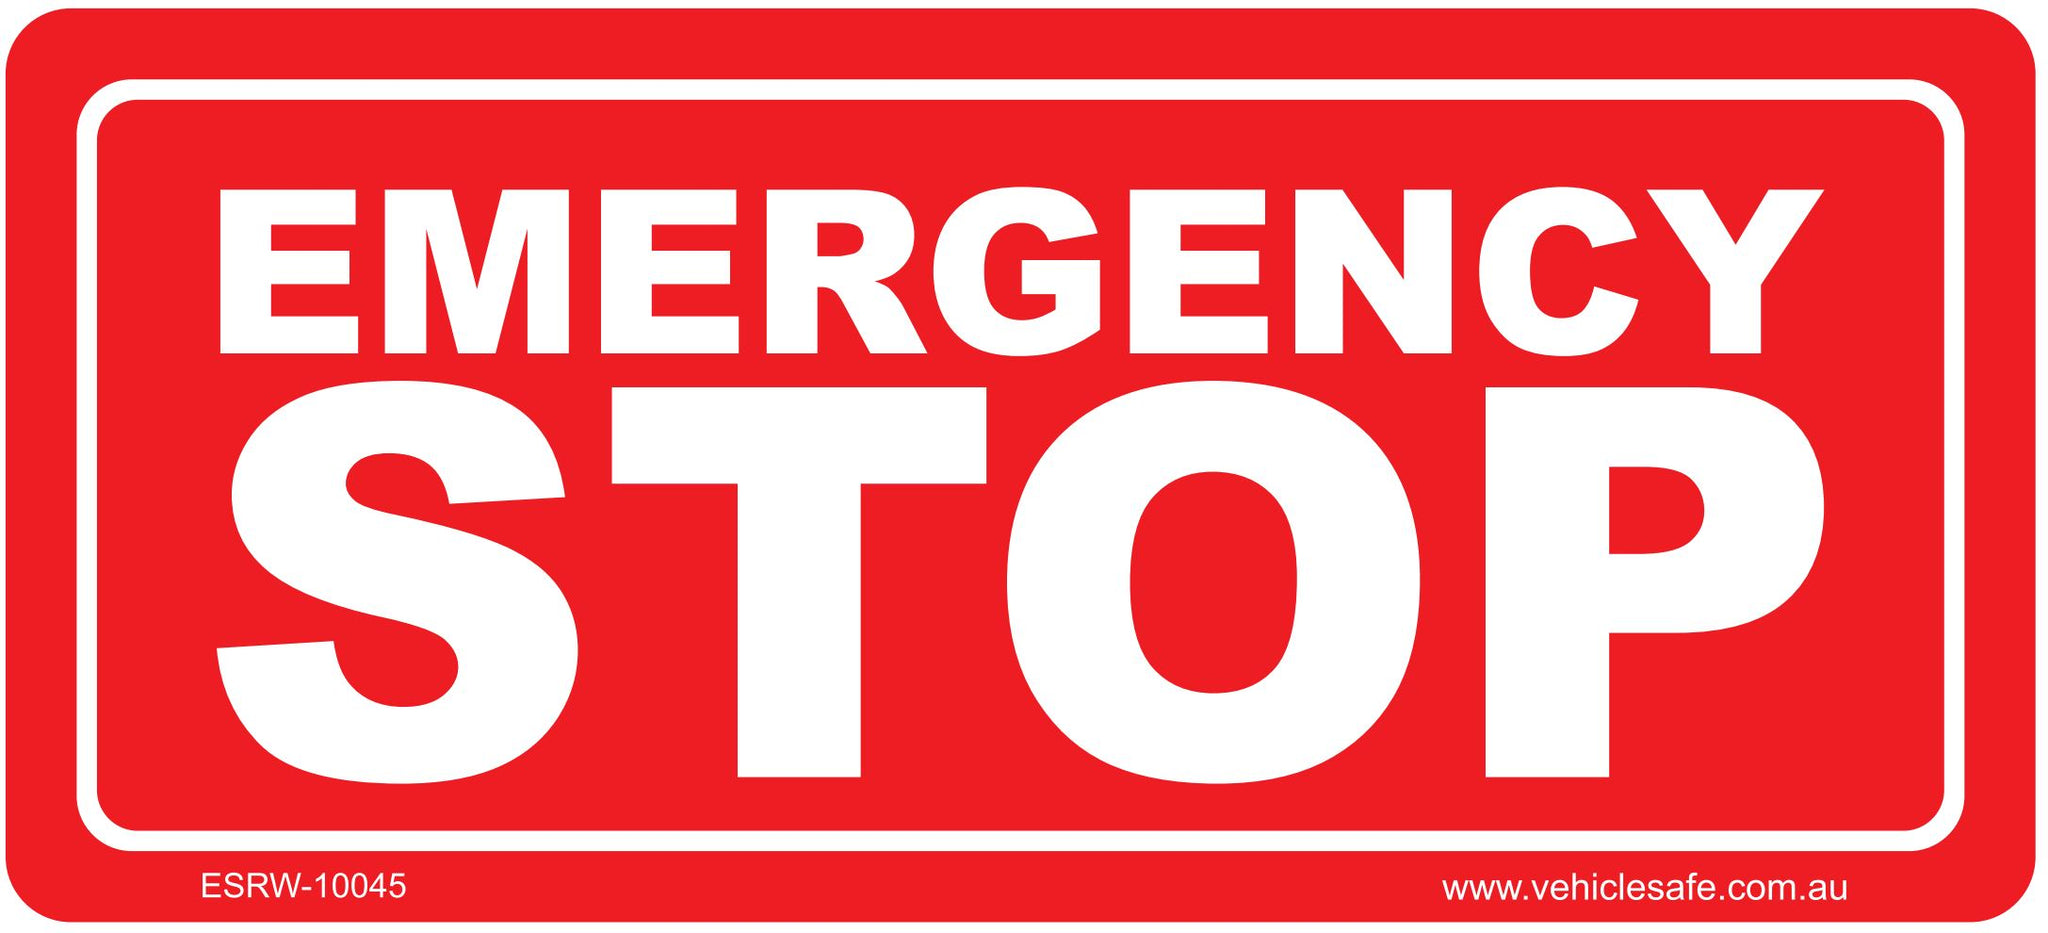 Emergency Stop Decal - 100mm x 40mm - Vehicle Safe